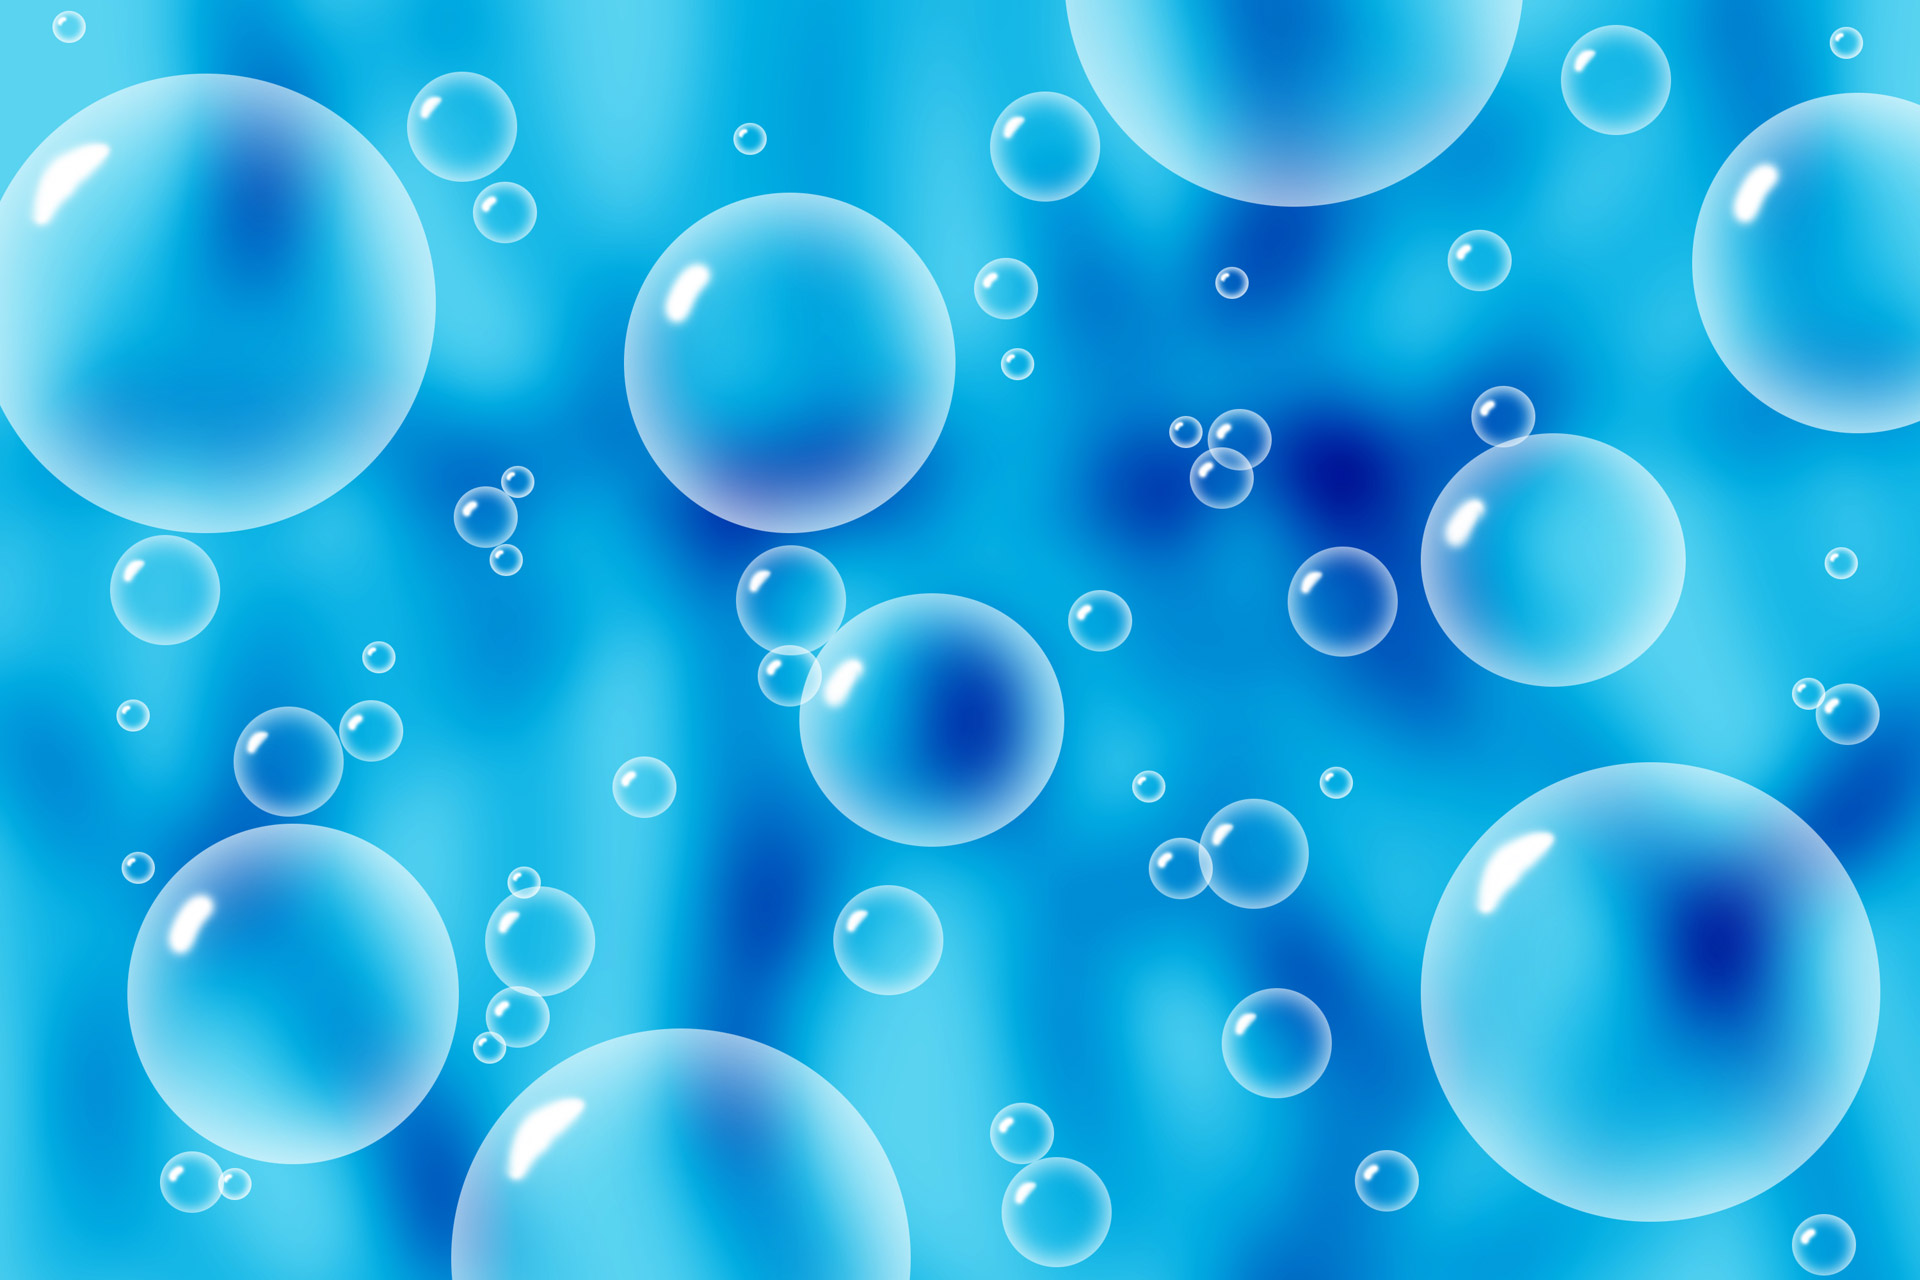 Gallery For Gt Blue Bubbles Wallpaper